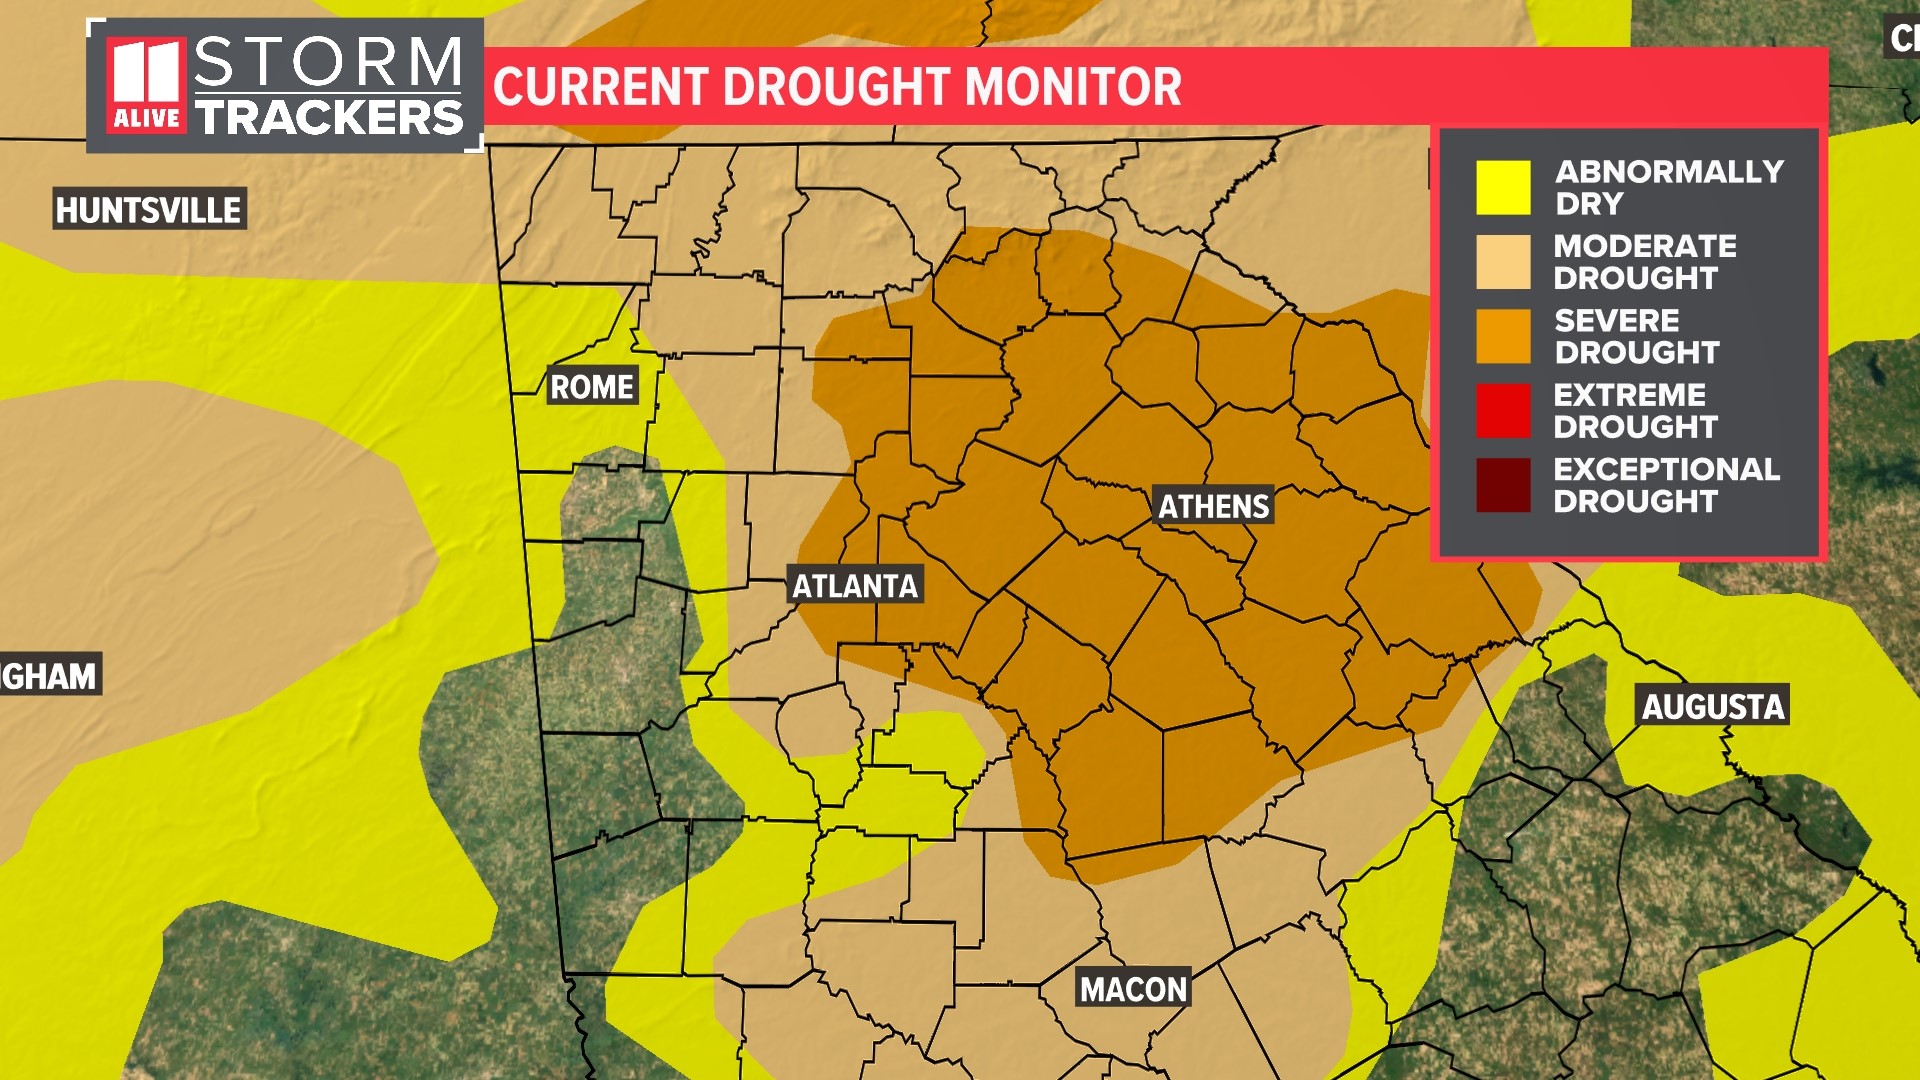 Severe Drought expands into the metro